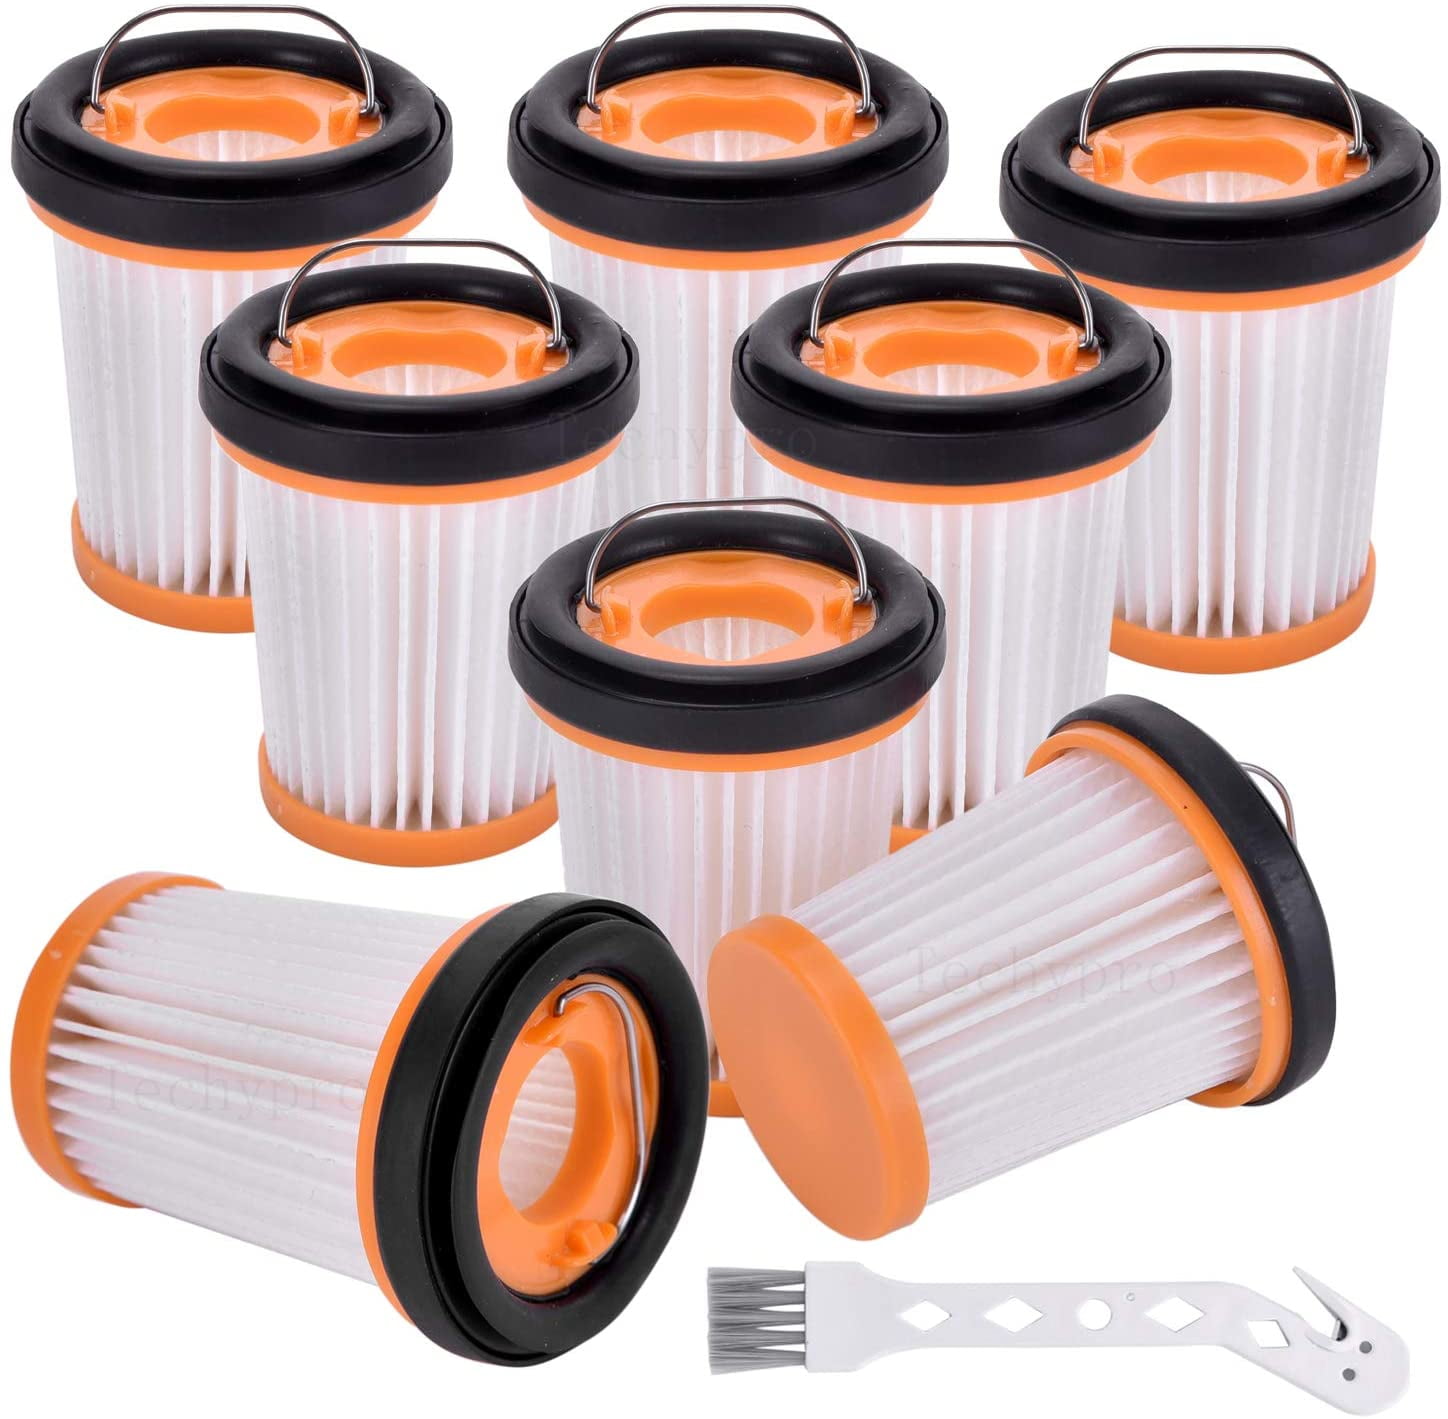 TIZZY 4 Pcs Replacement Vacuum Filter Compatible for Shark W1 WV200 WV201 WV205 WV220 Cordless Handheld Vacuum Cleaner 